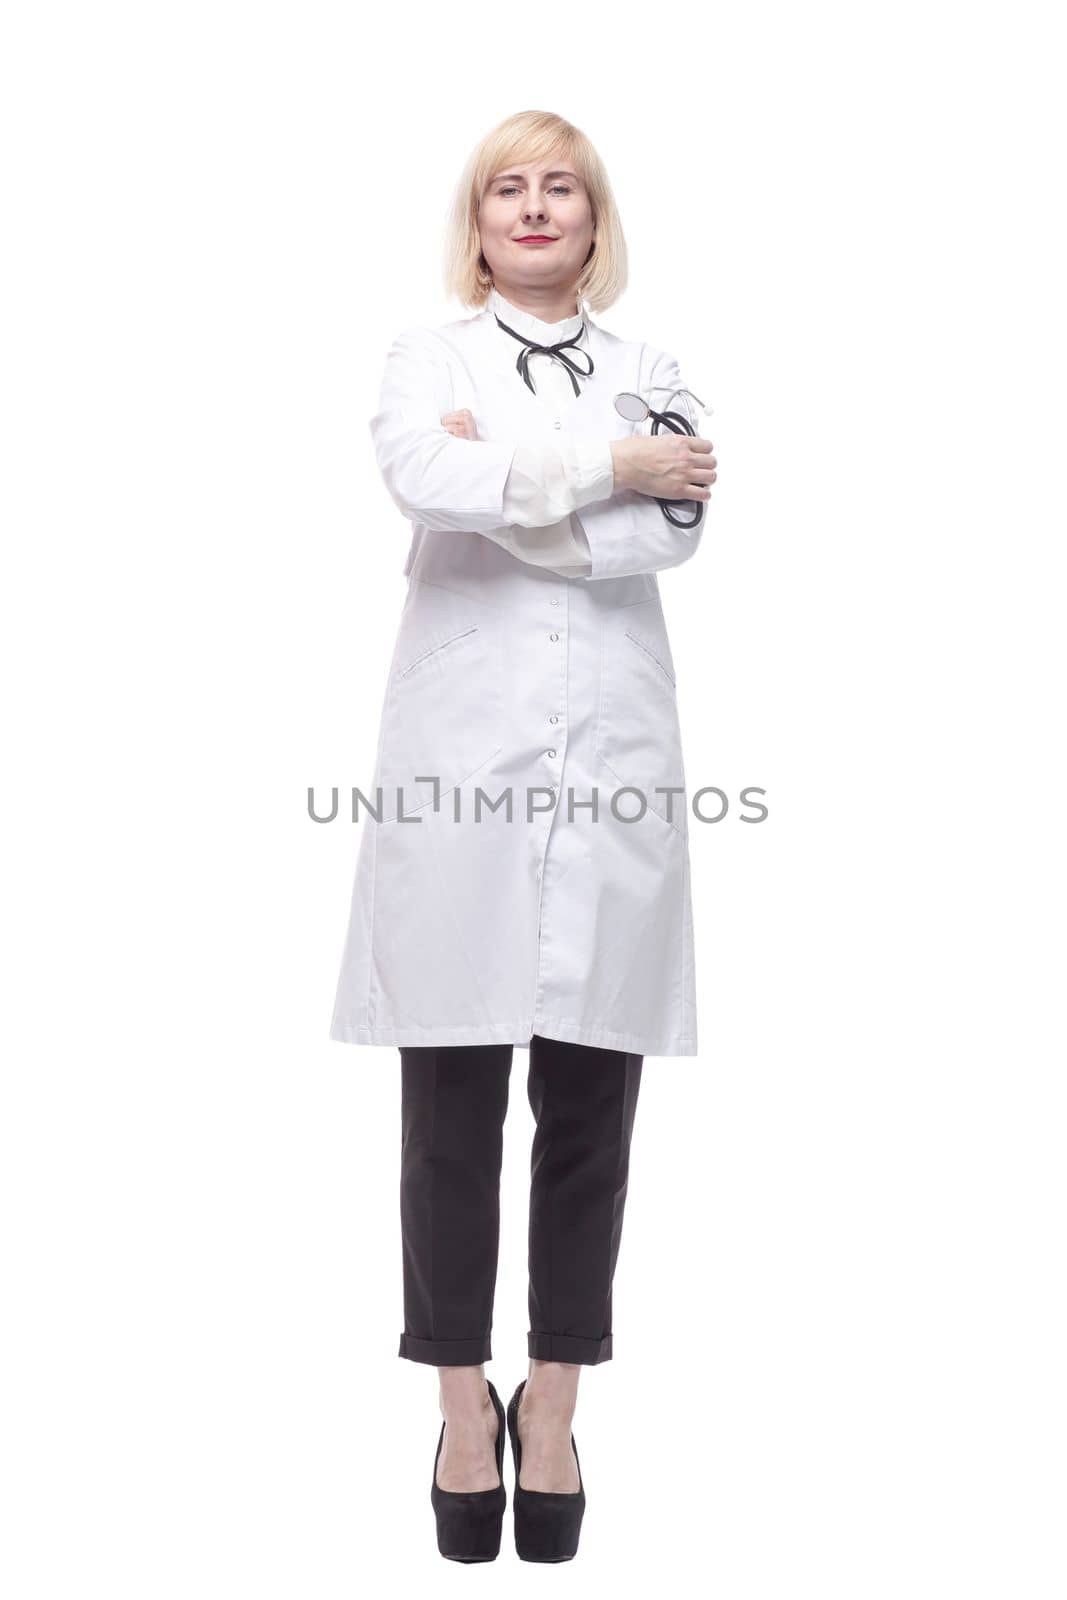 qualified female doctor with a stethoscope in her hands. isolated on a white background.